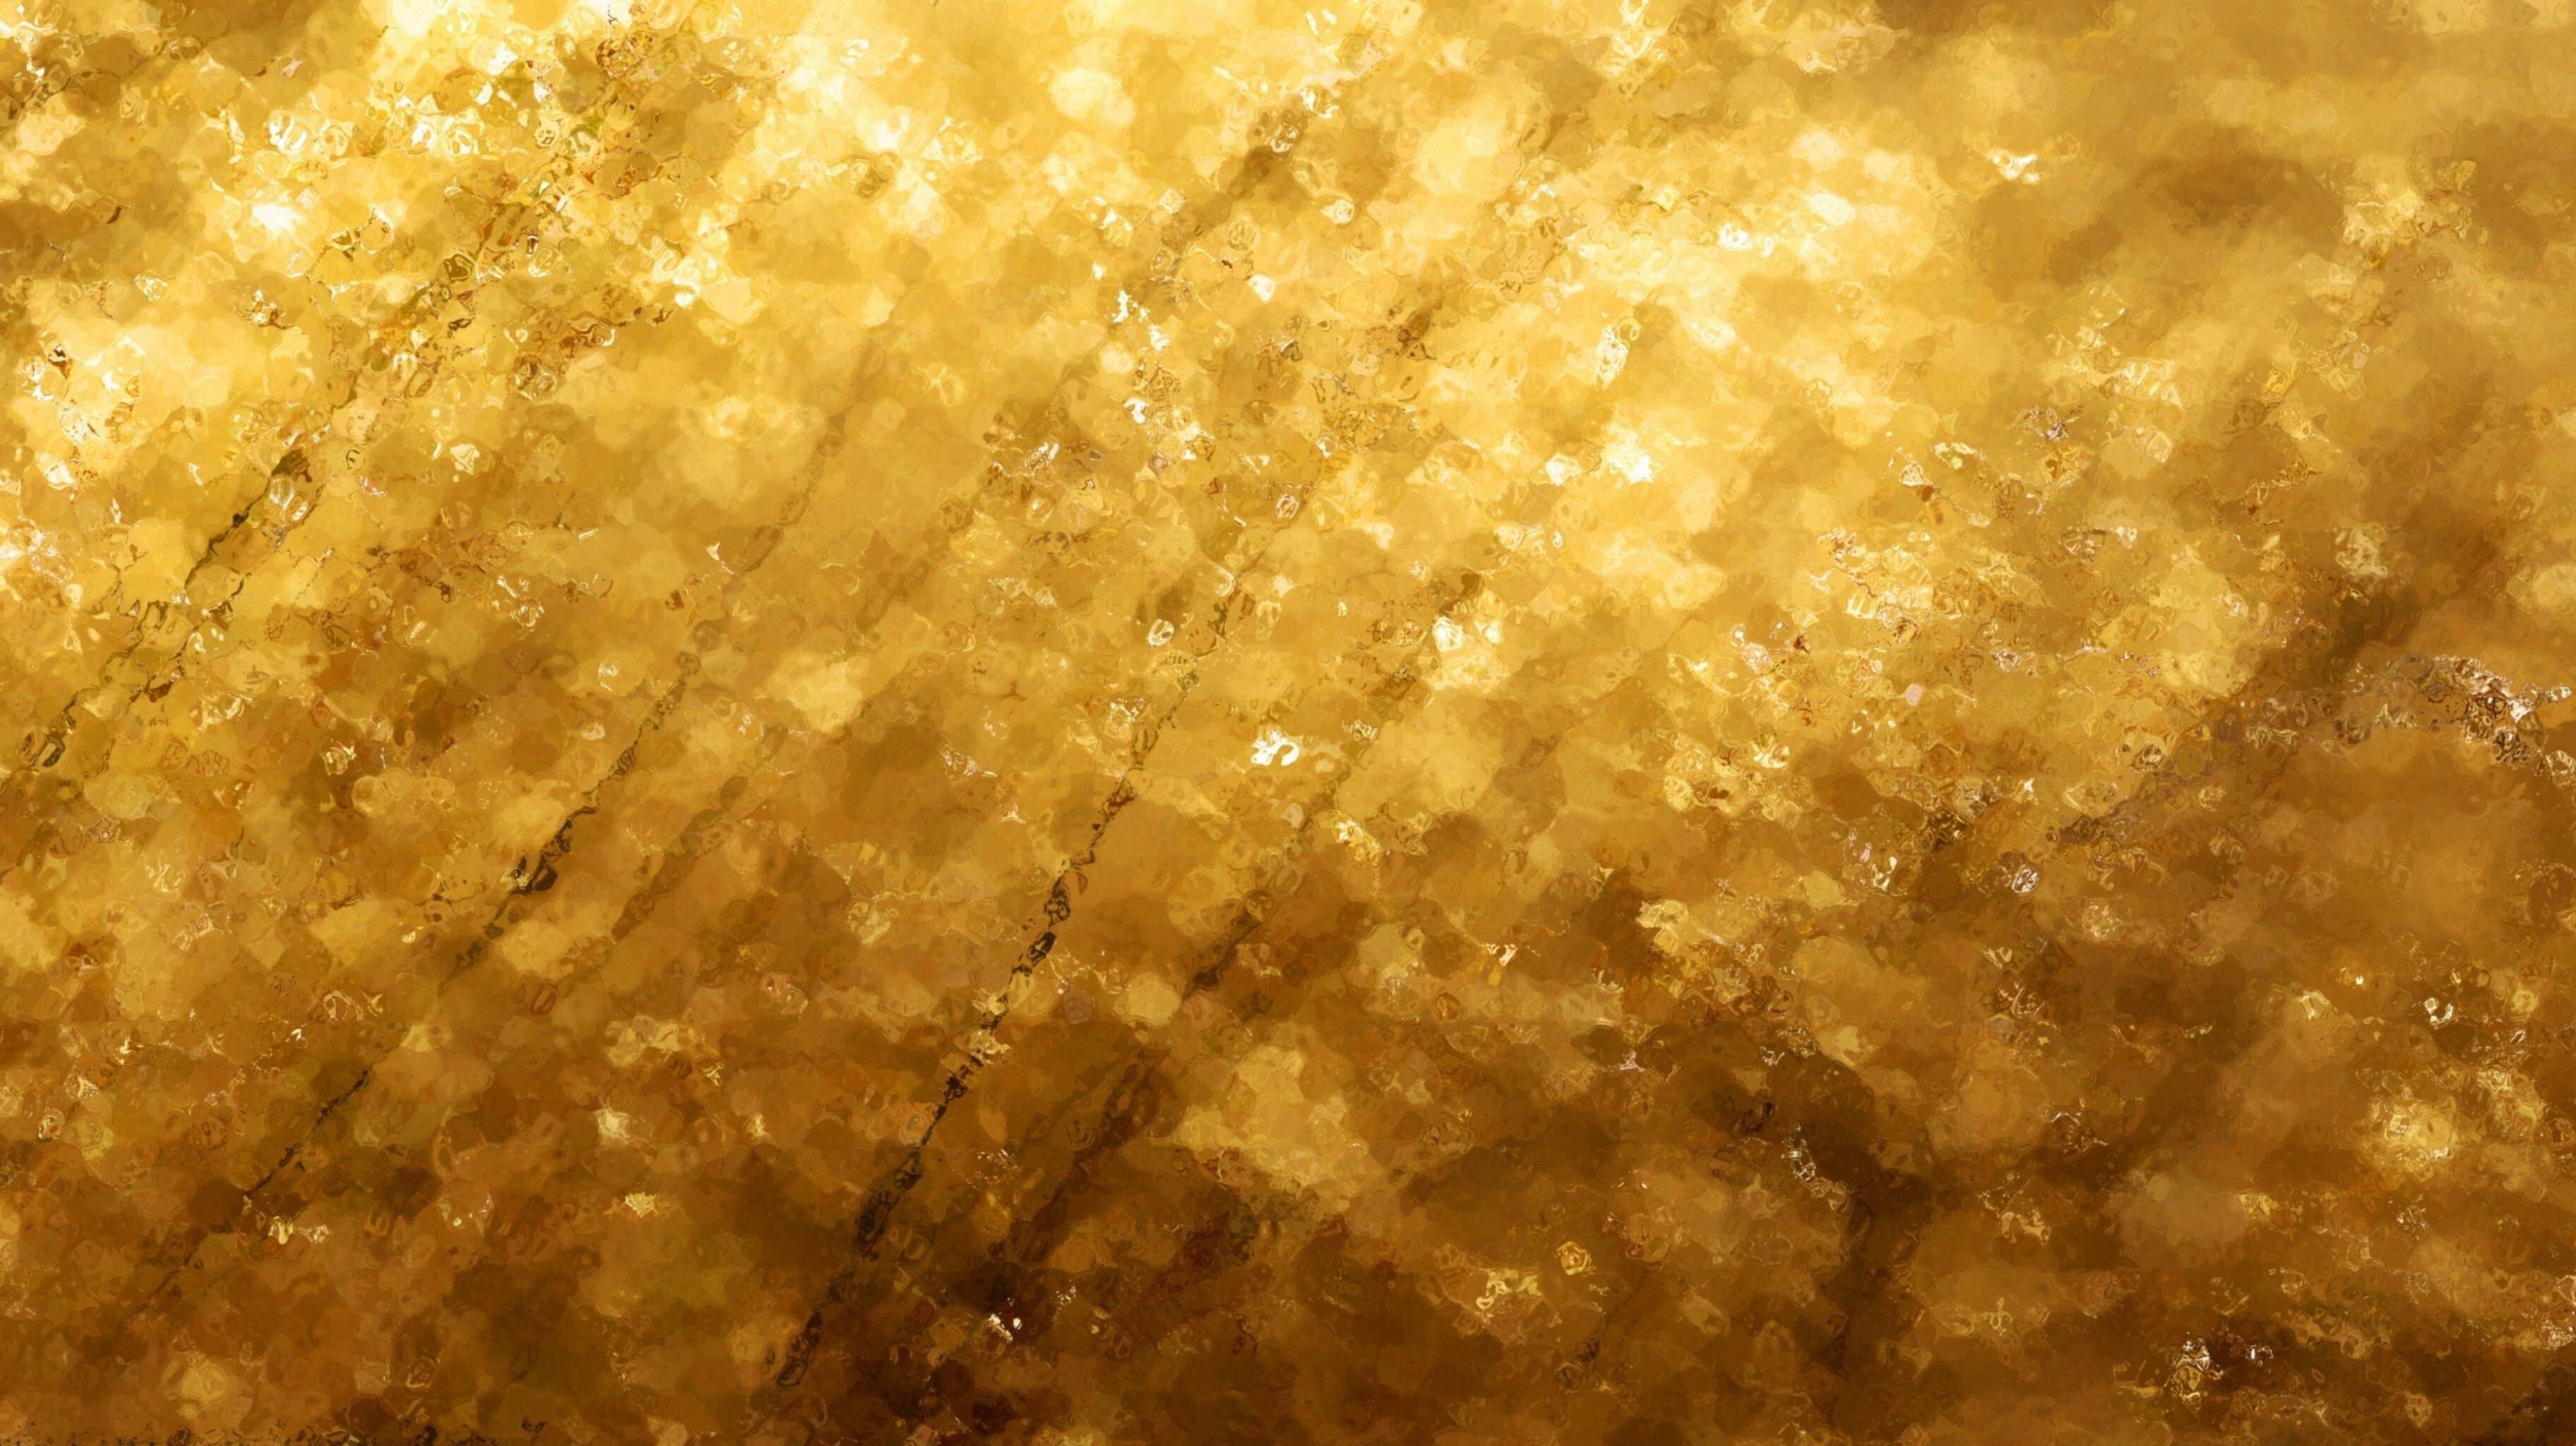 Gold Backgrounds Image - Wallpaper Cave